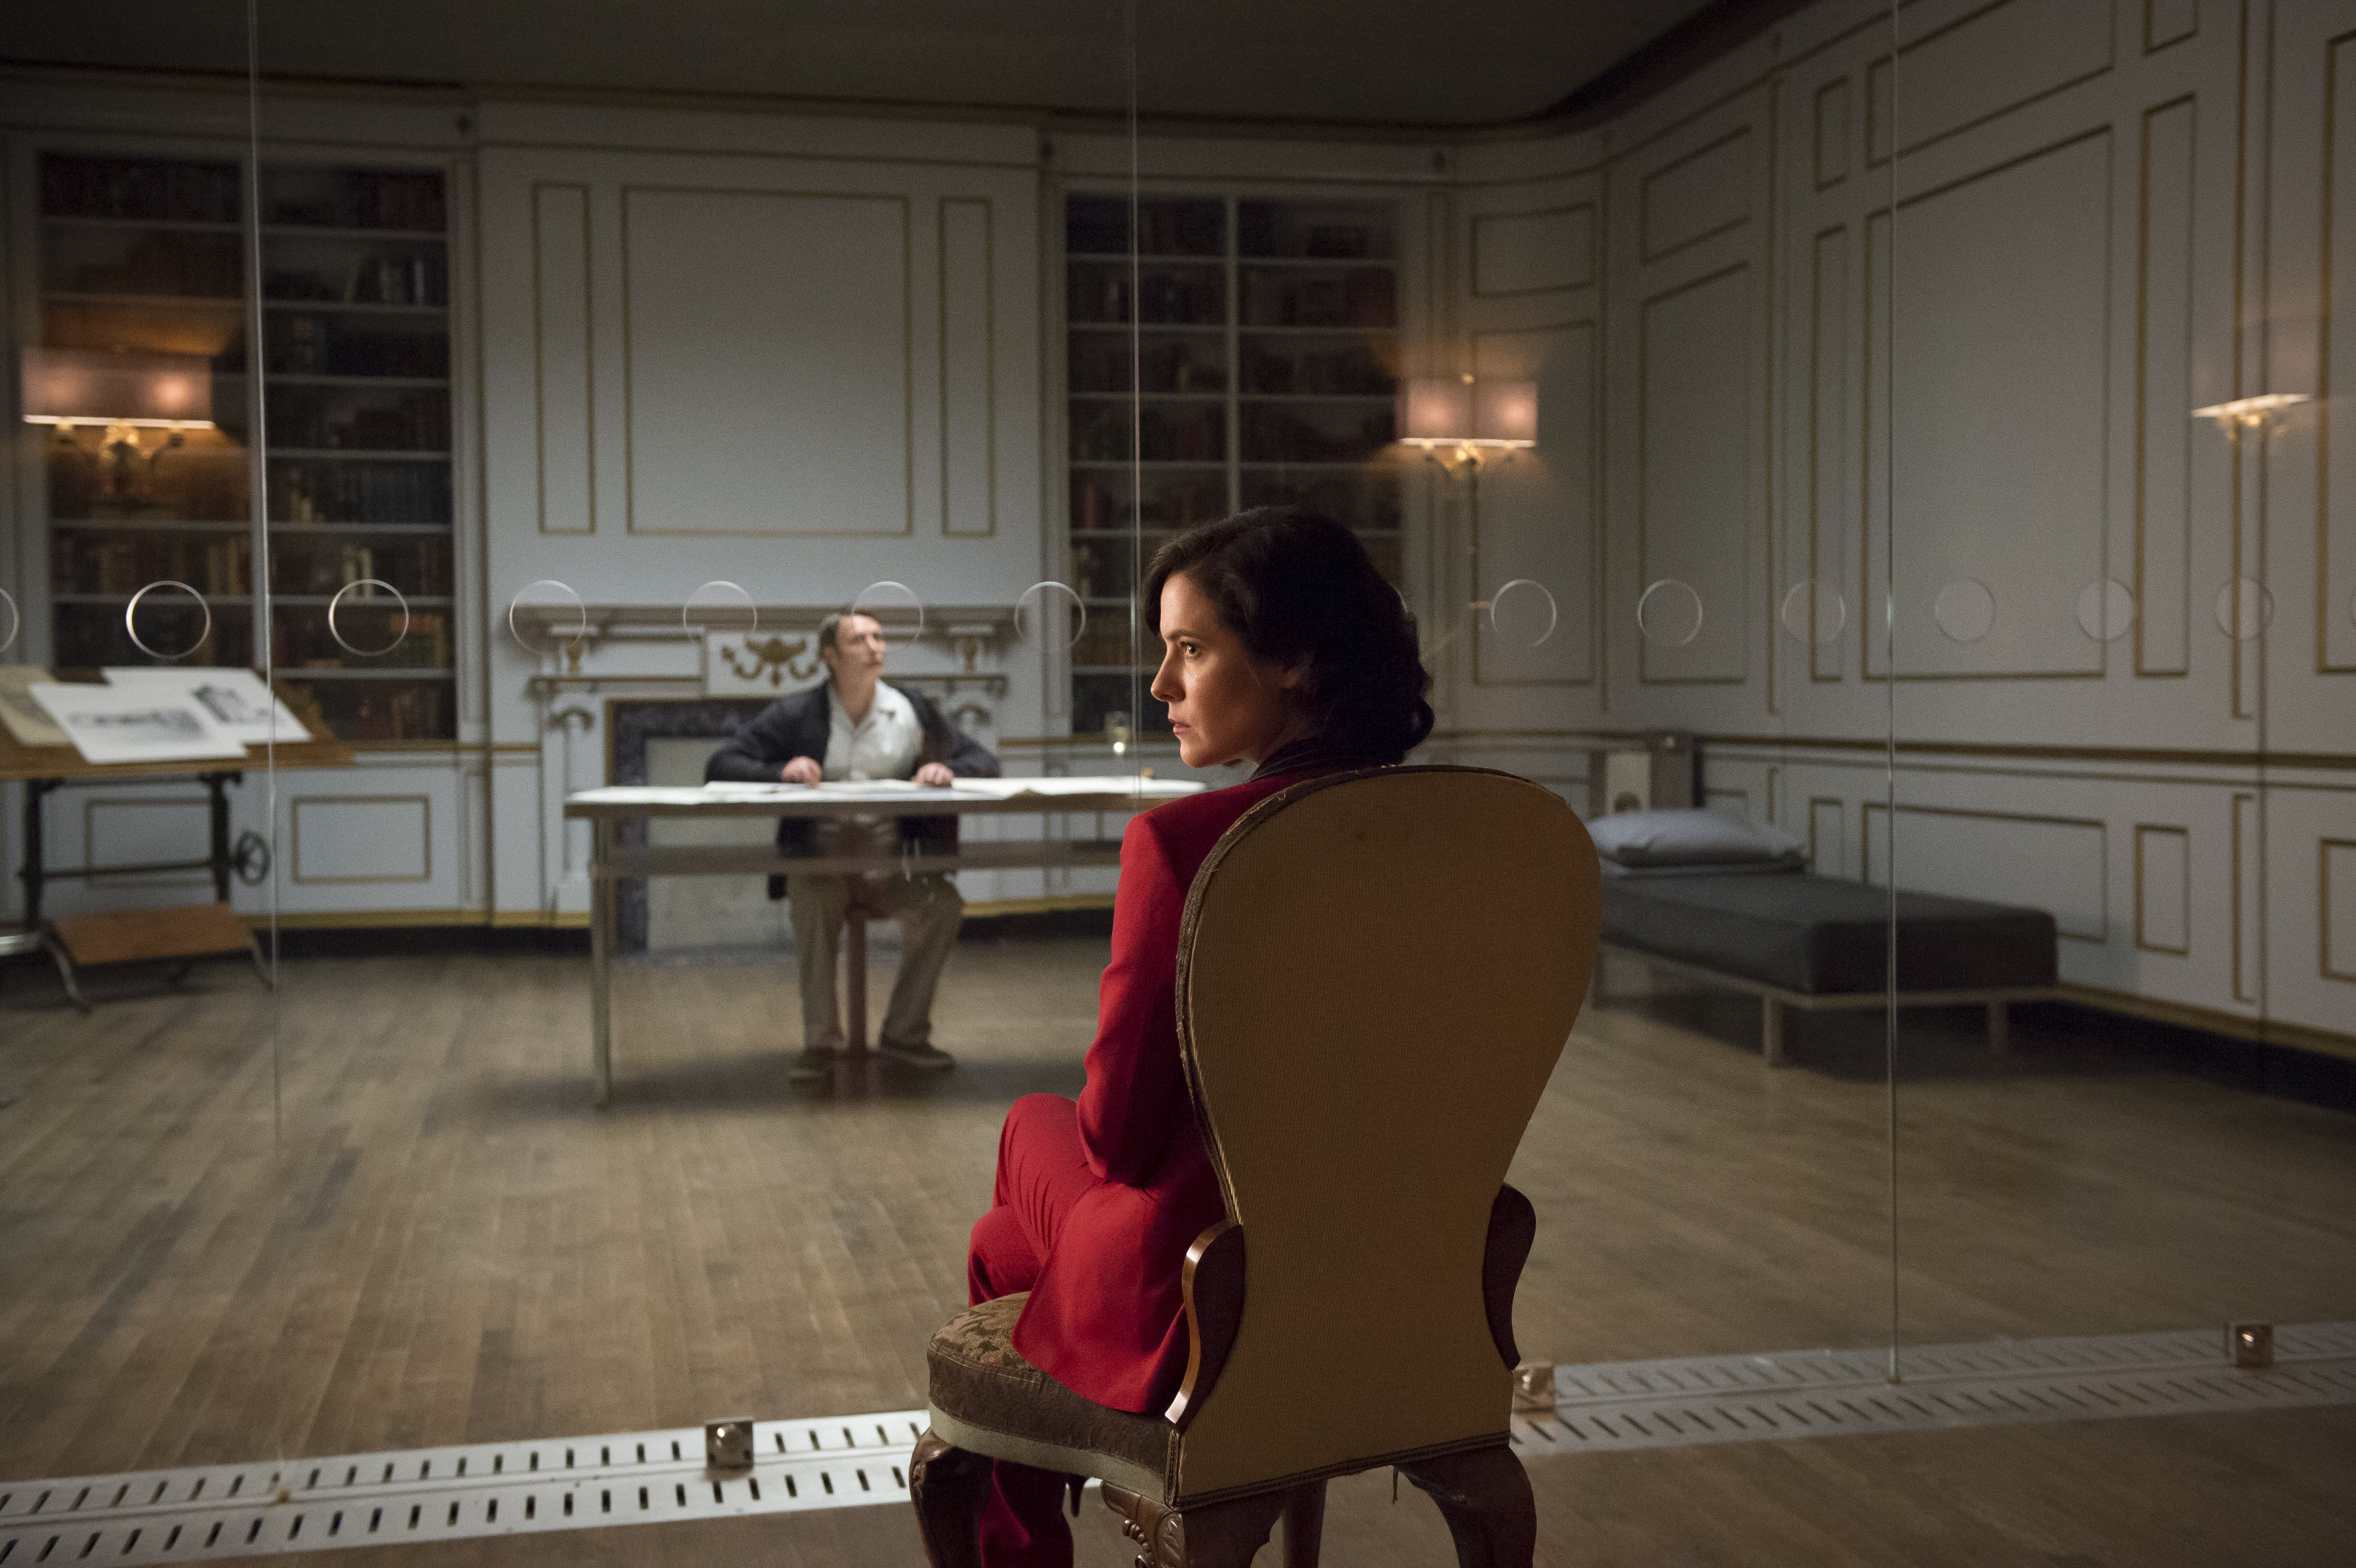 [Review] - Hannibal, Season 3 Episode 8, "The Great Red Dragon"